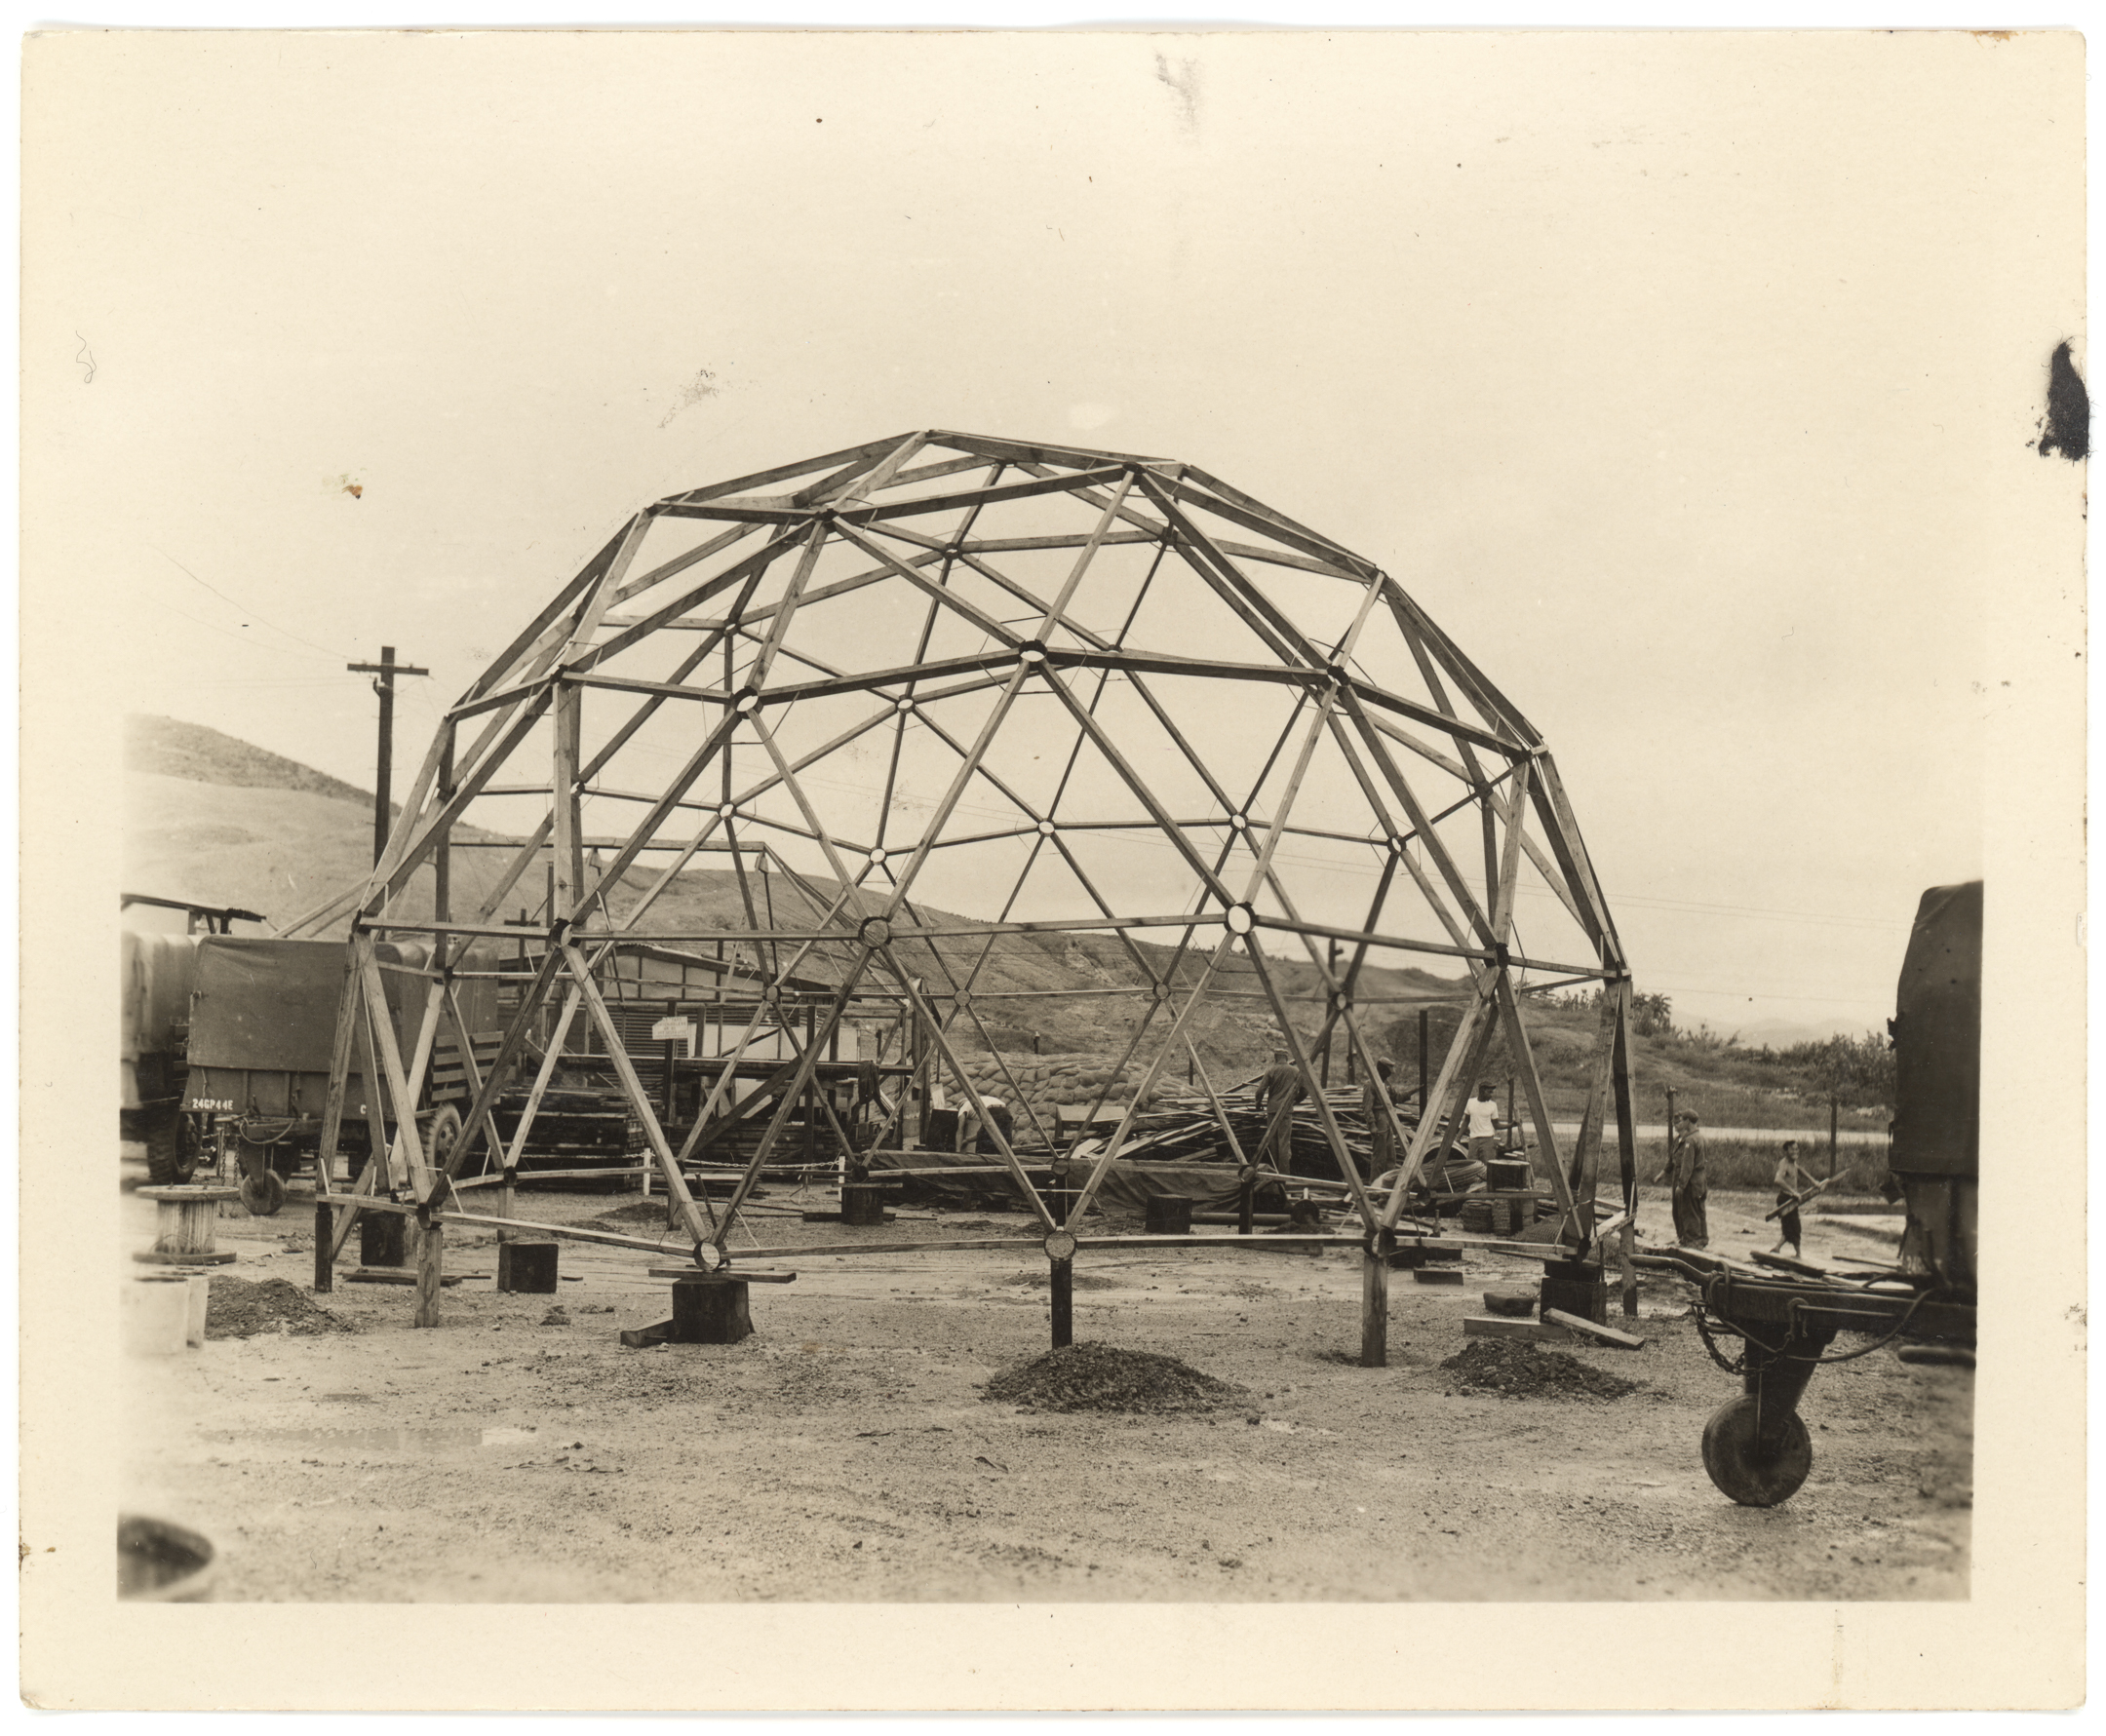 Found Photos: Geodesic Dome — Miller Taylor